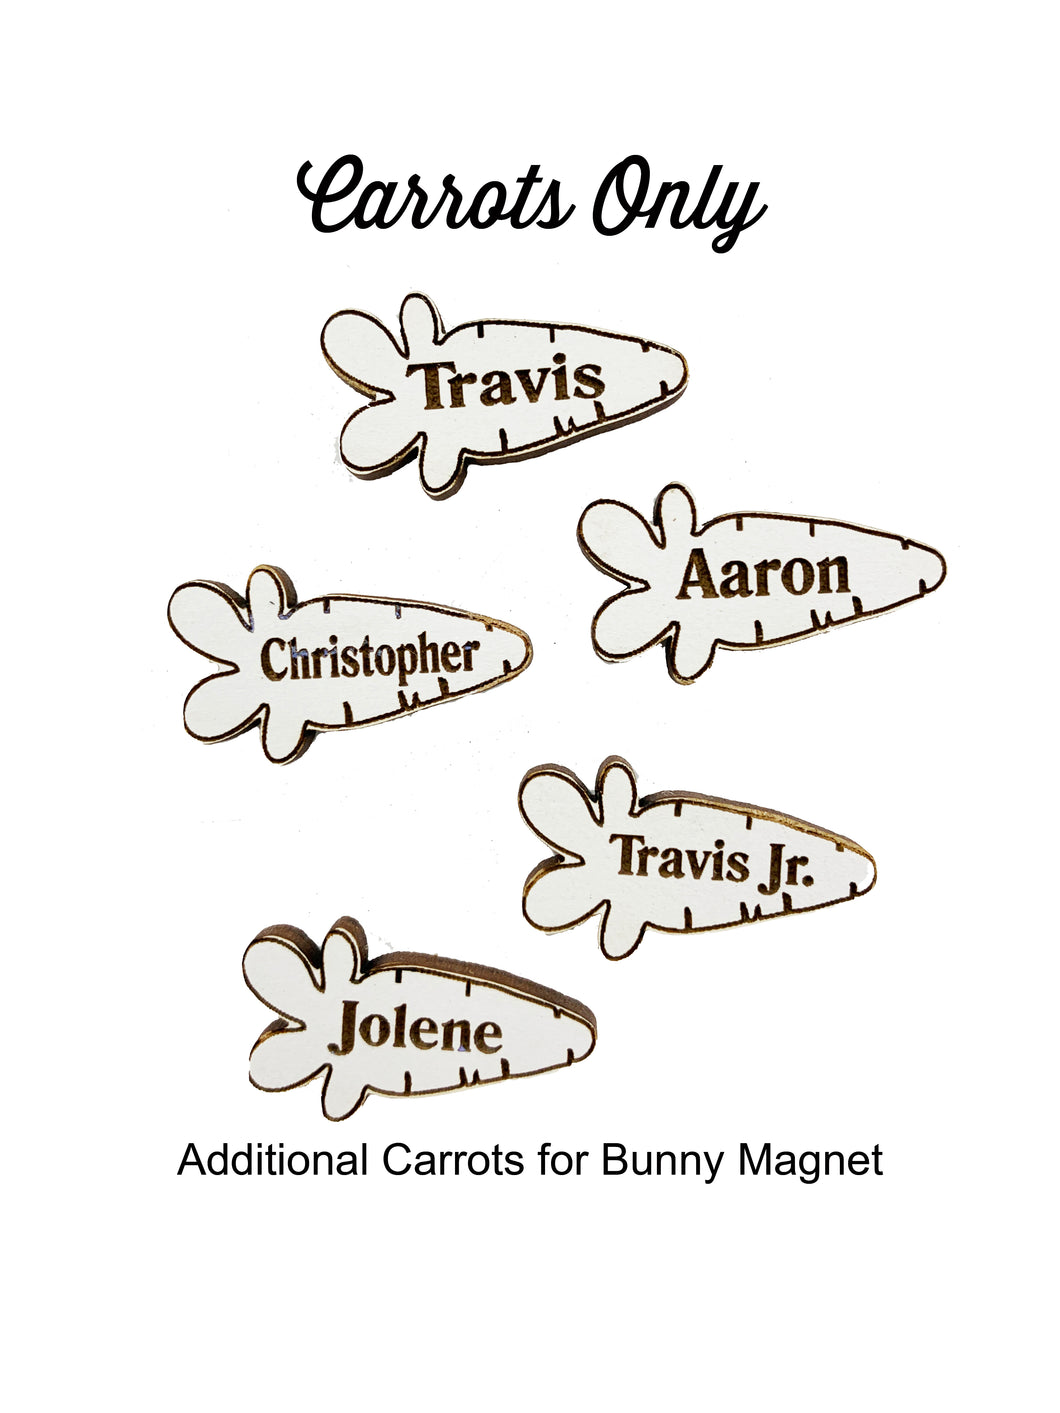 New Set of Carrots: Reorder More Carrot Pieces for Bunny Magnet - Bunny Magnet Sold Separately - Add More Throughout the Years